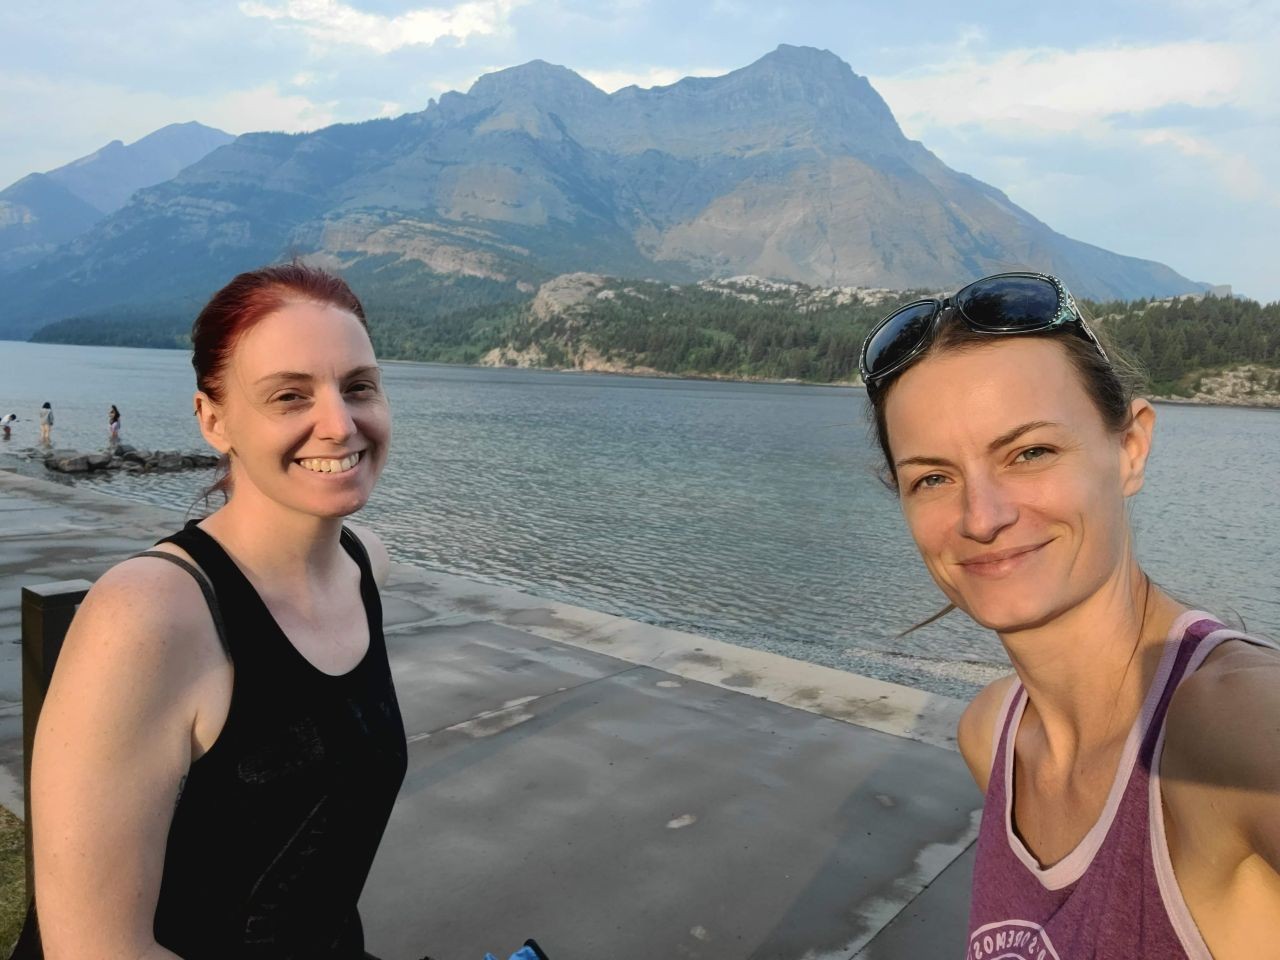 On a girls trip to Waterton Lakes National Park, while walking the Lakeshore trail on Waterton Lake by the marina. Lovely mountain views, and a stunning lake too.